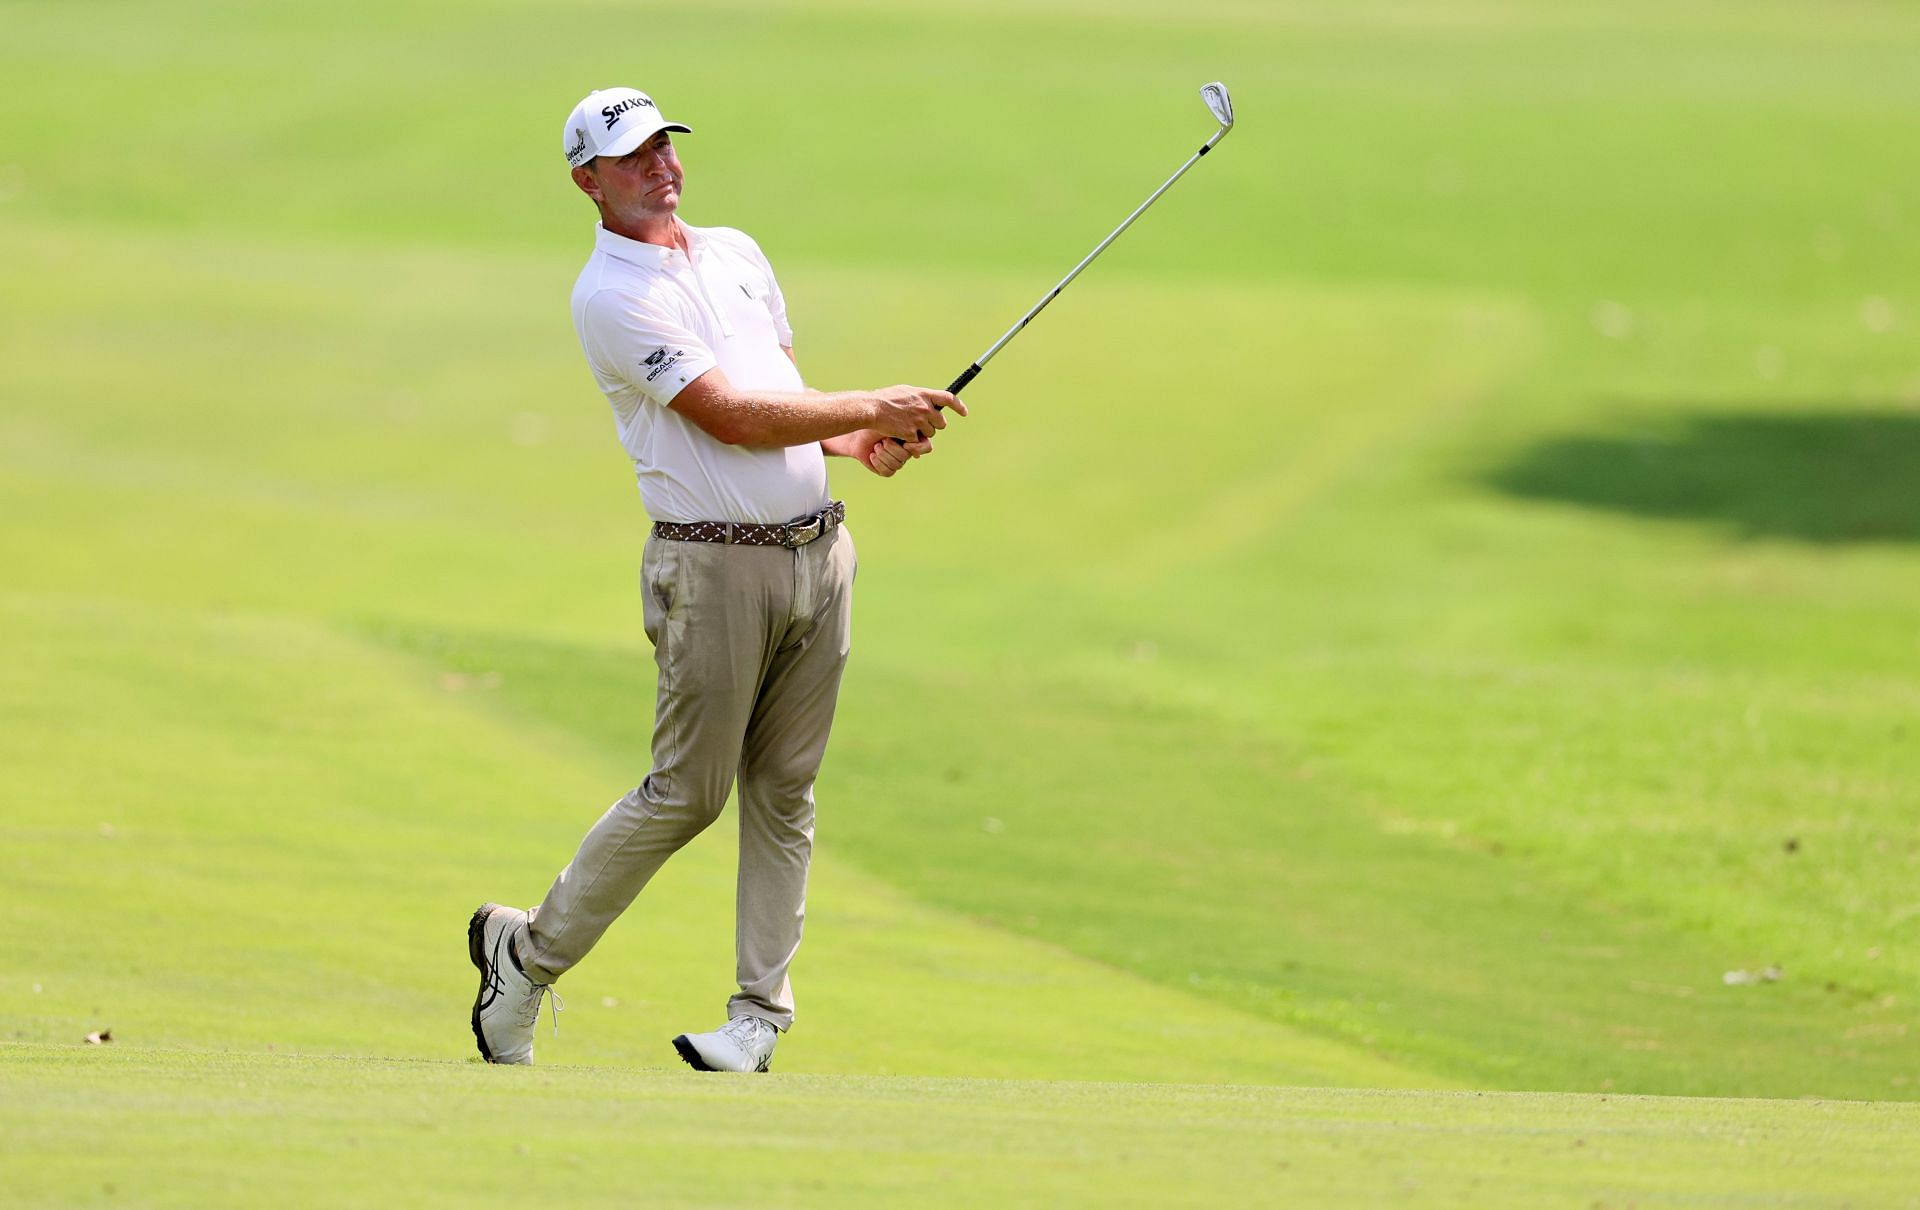 Lucas Glover at the 2023 FedEx St. Jude Championship (via Getty Images)